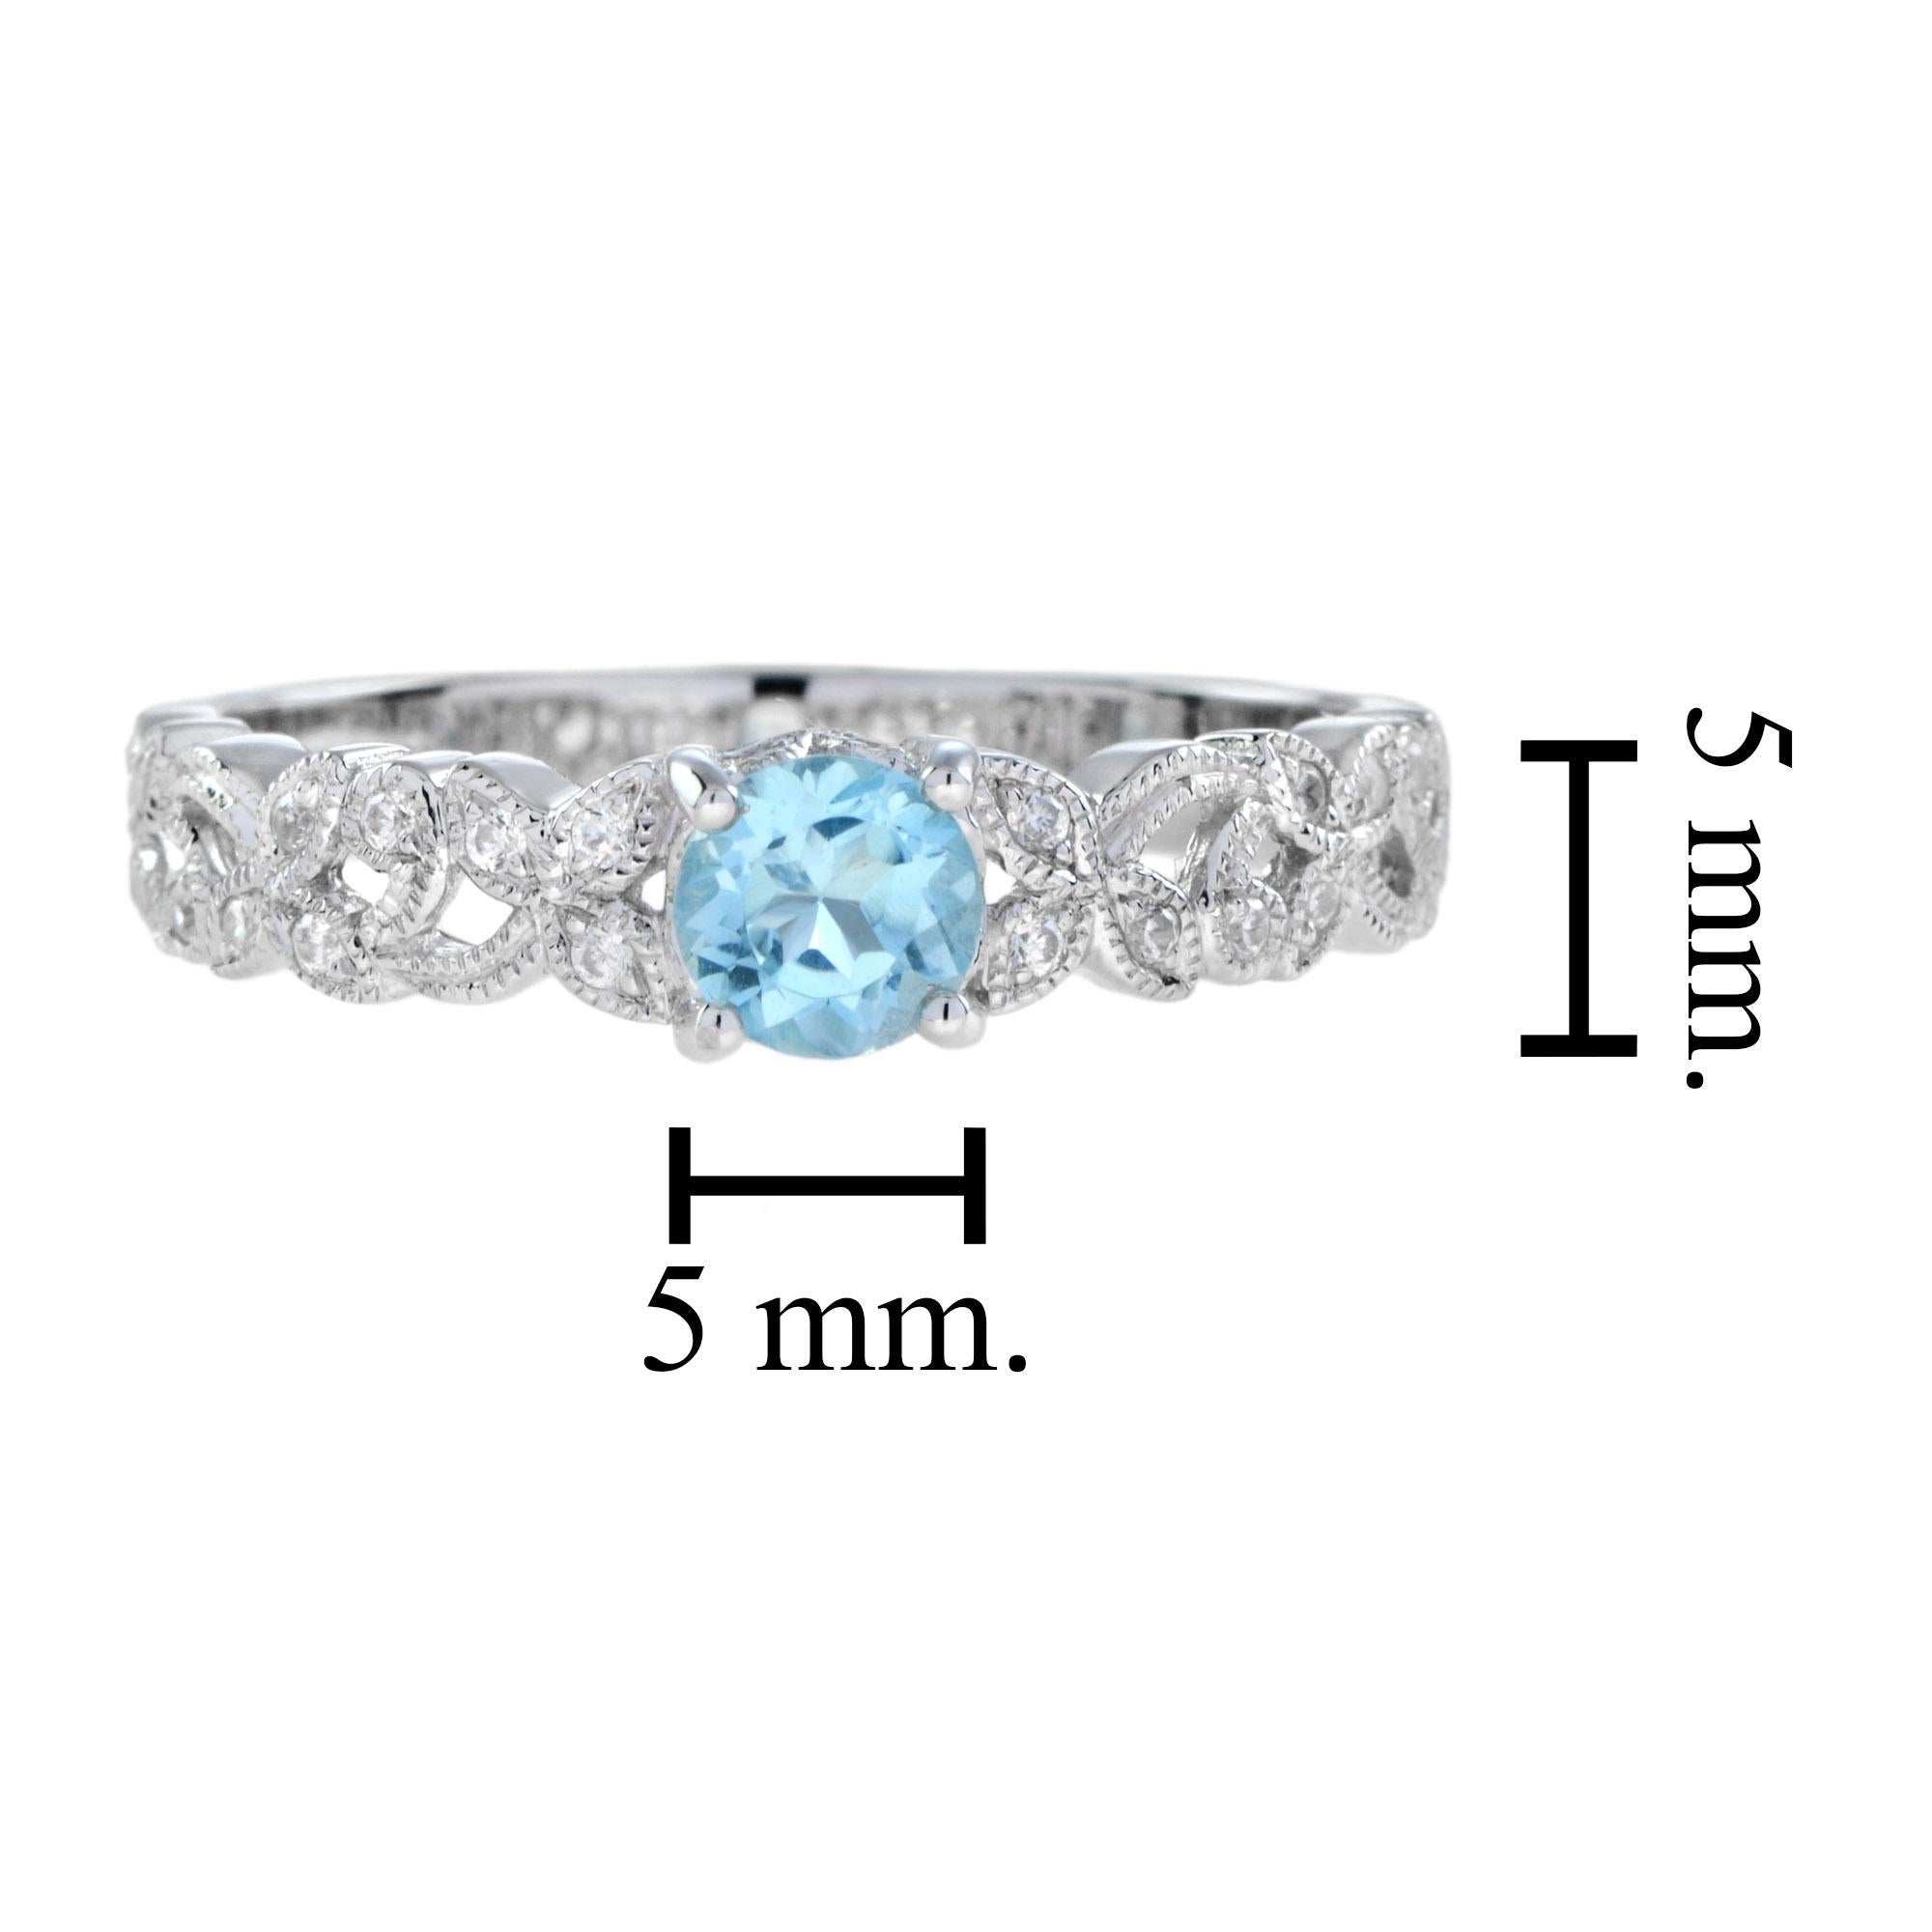 For Sale:  One Round Blue Topaz with Diamond Filigree Band Ring in 14K White Gold 6